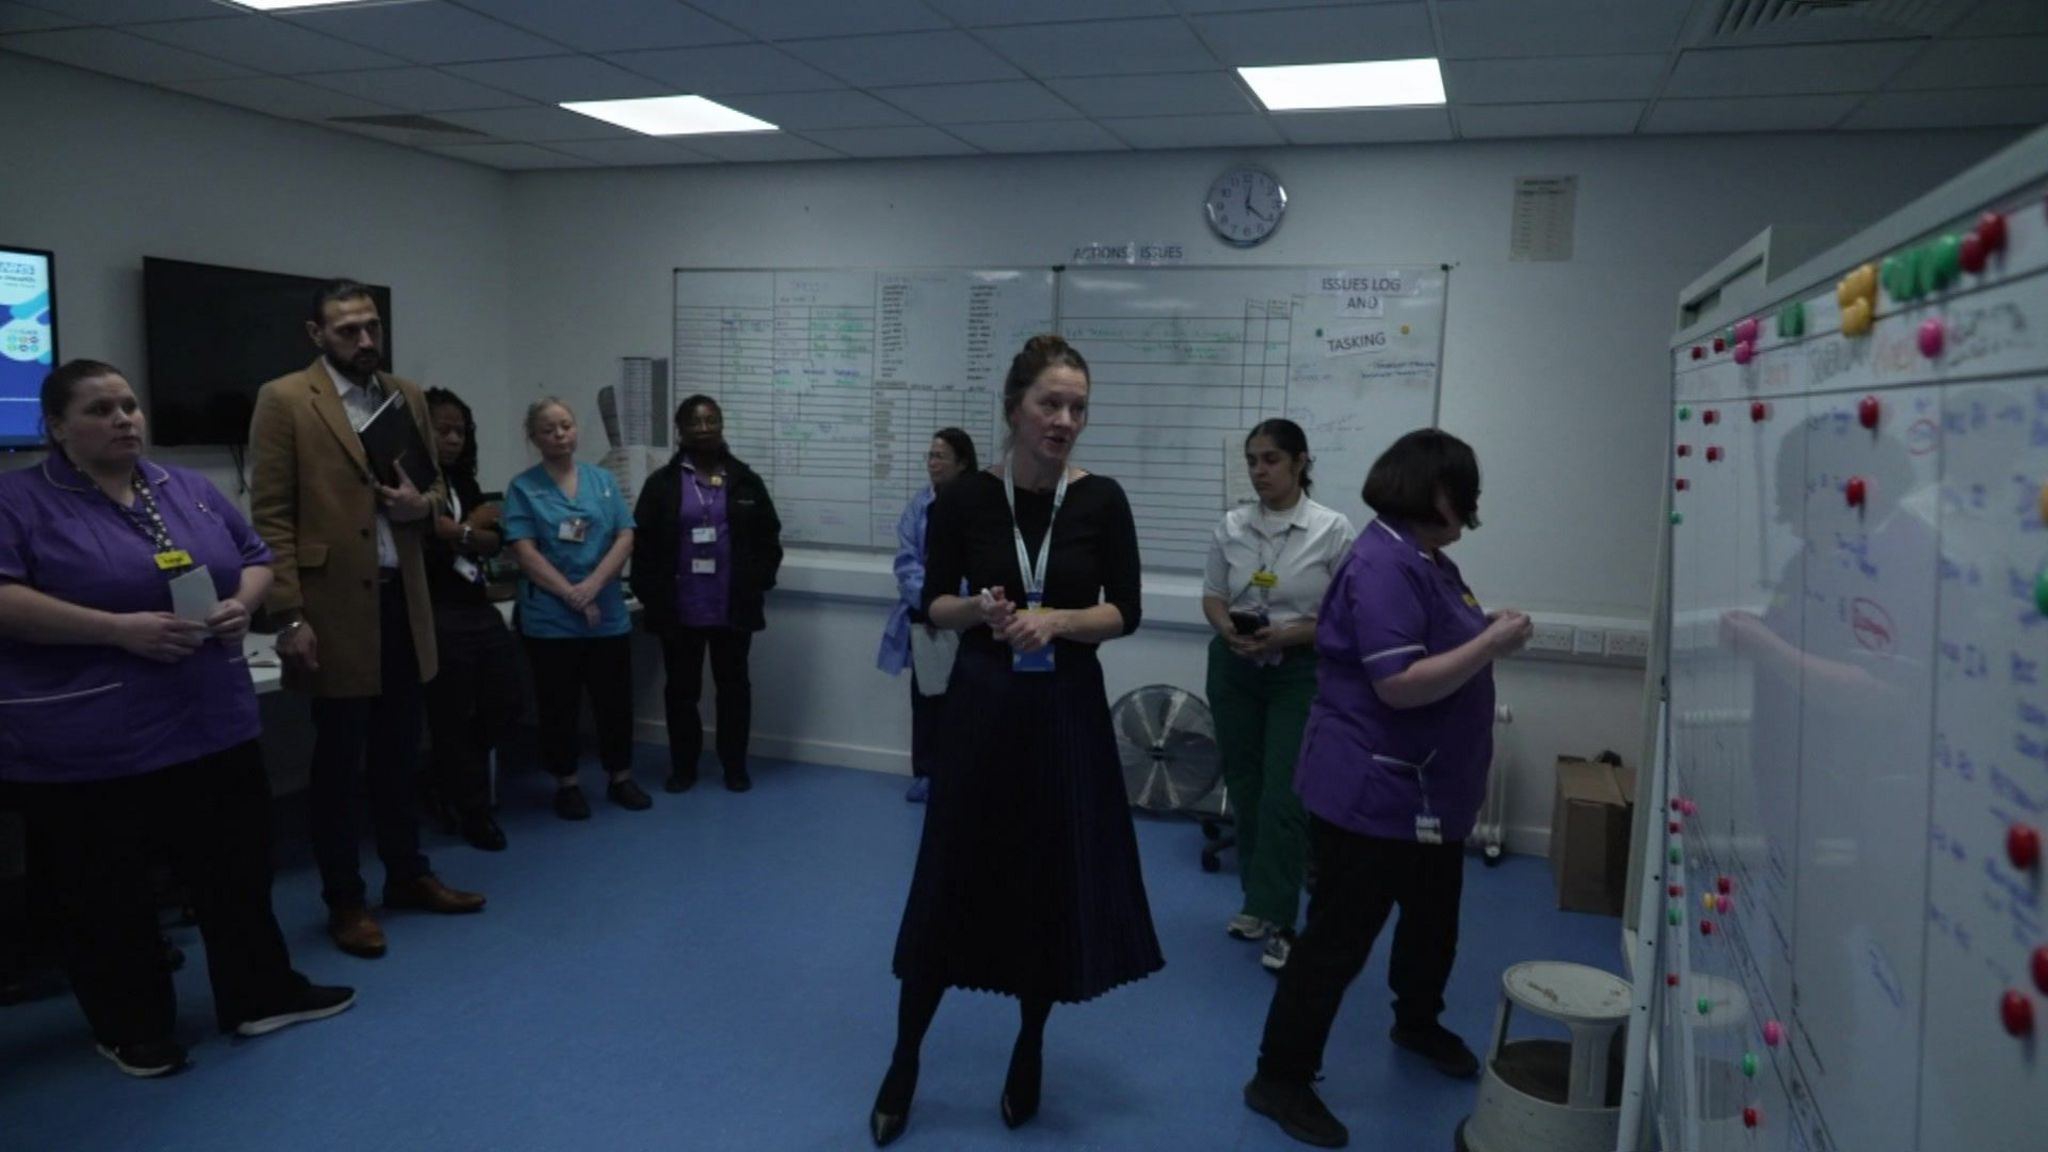 Staff at Newham Hospital meet to discuss bed occupancies